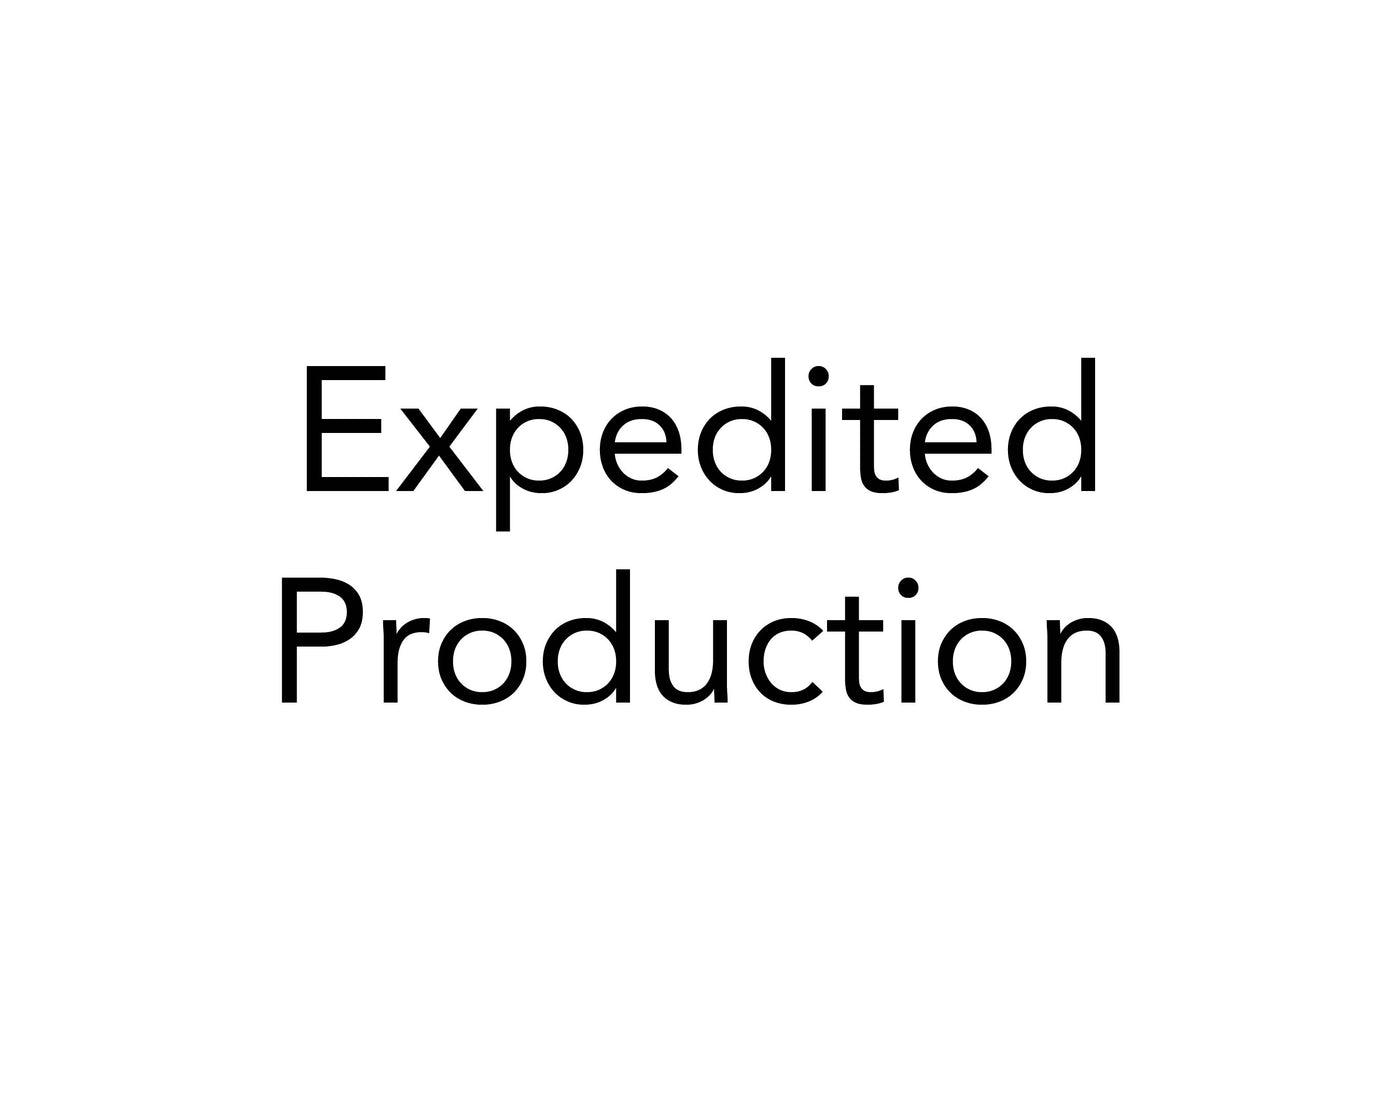 Expedited Production